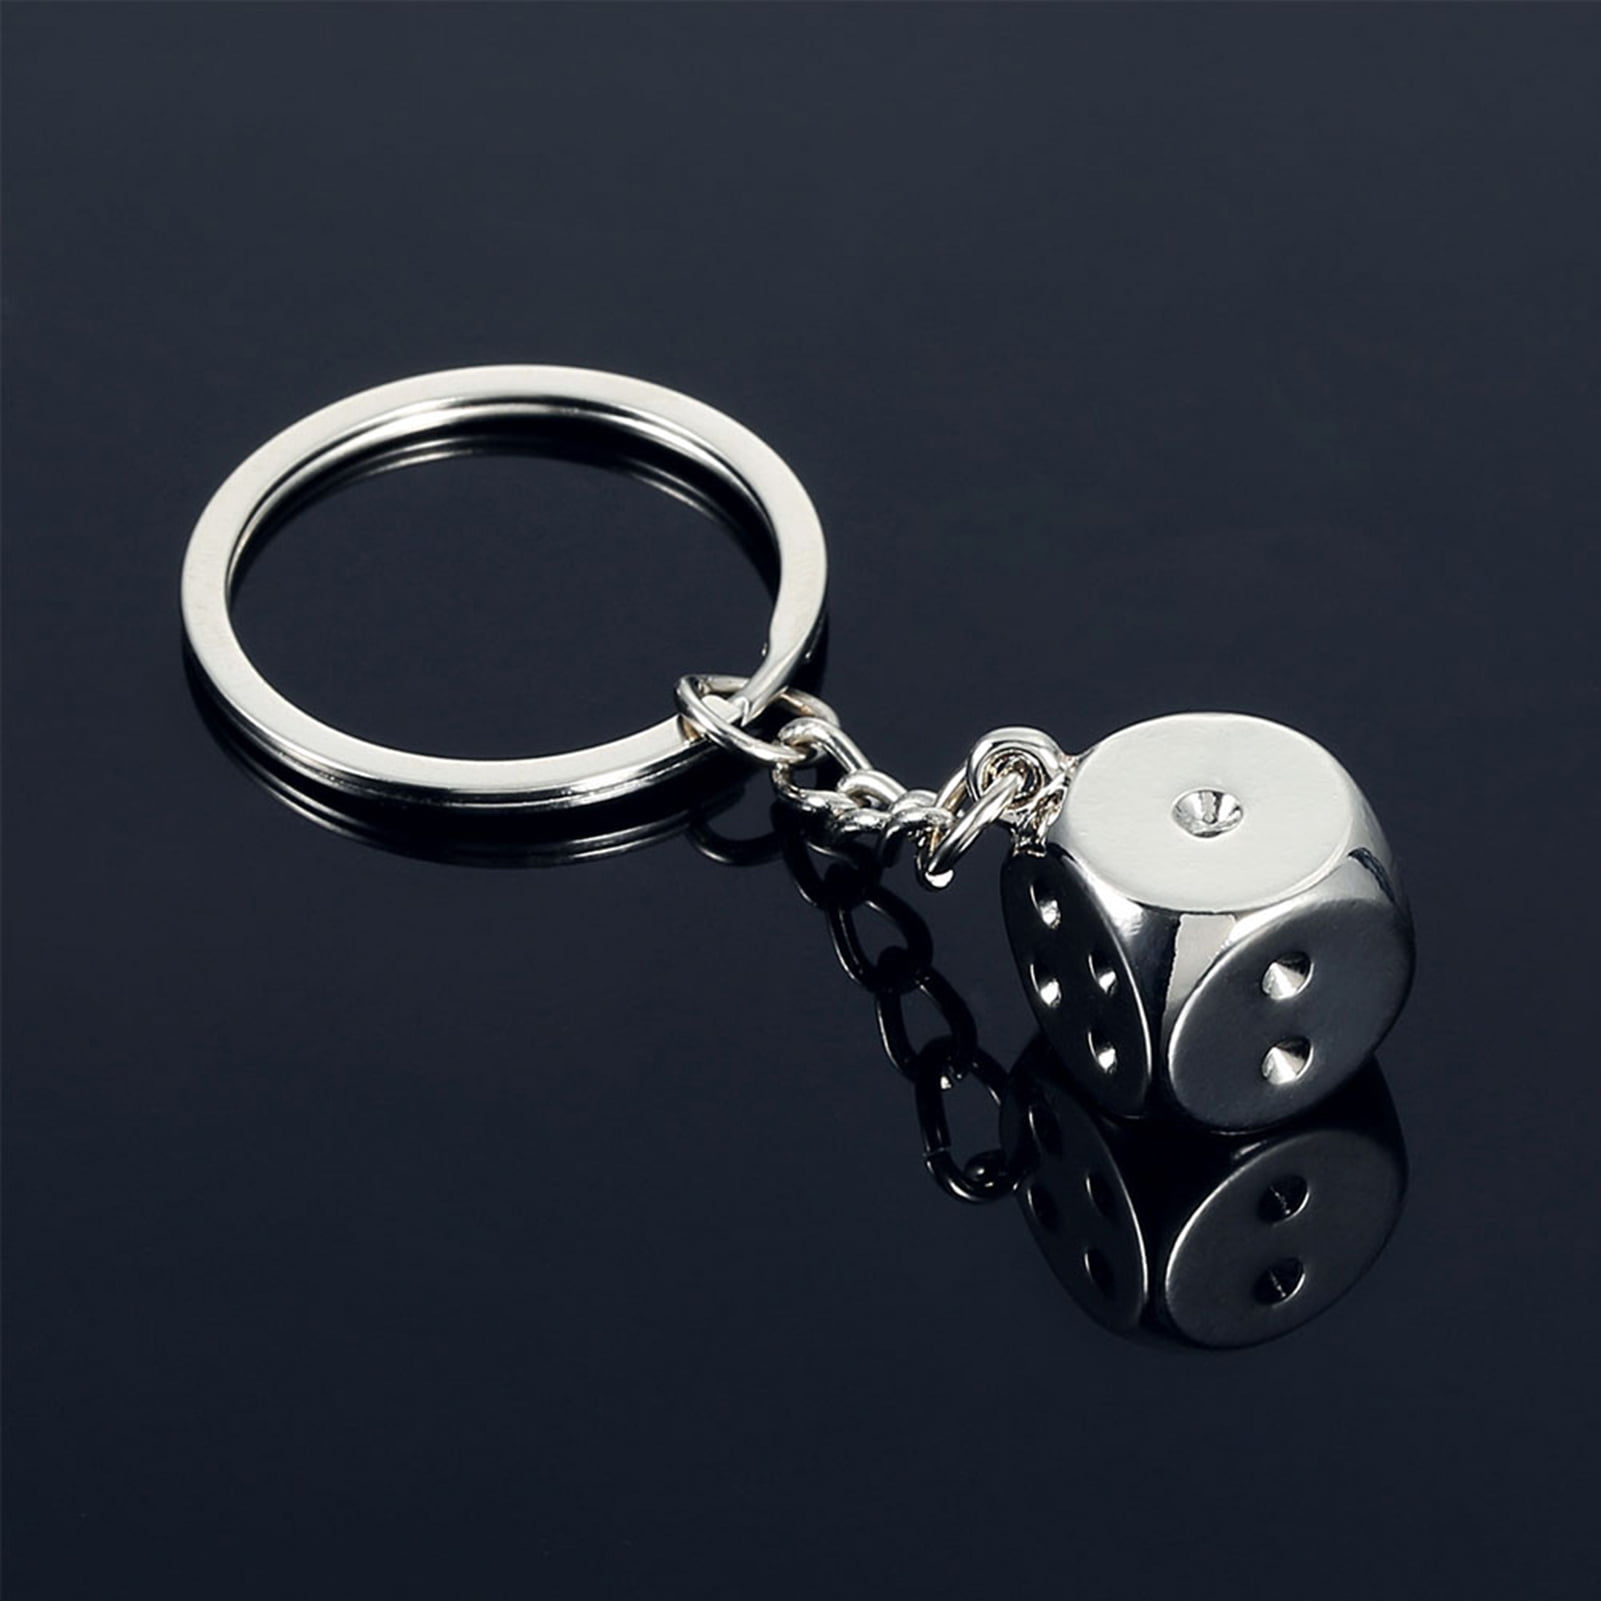 Details about   Metal Die Keychain Silver Dice 1” US Seller 